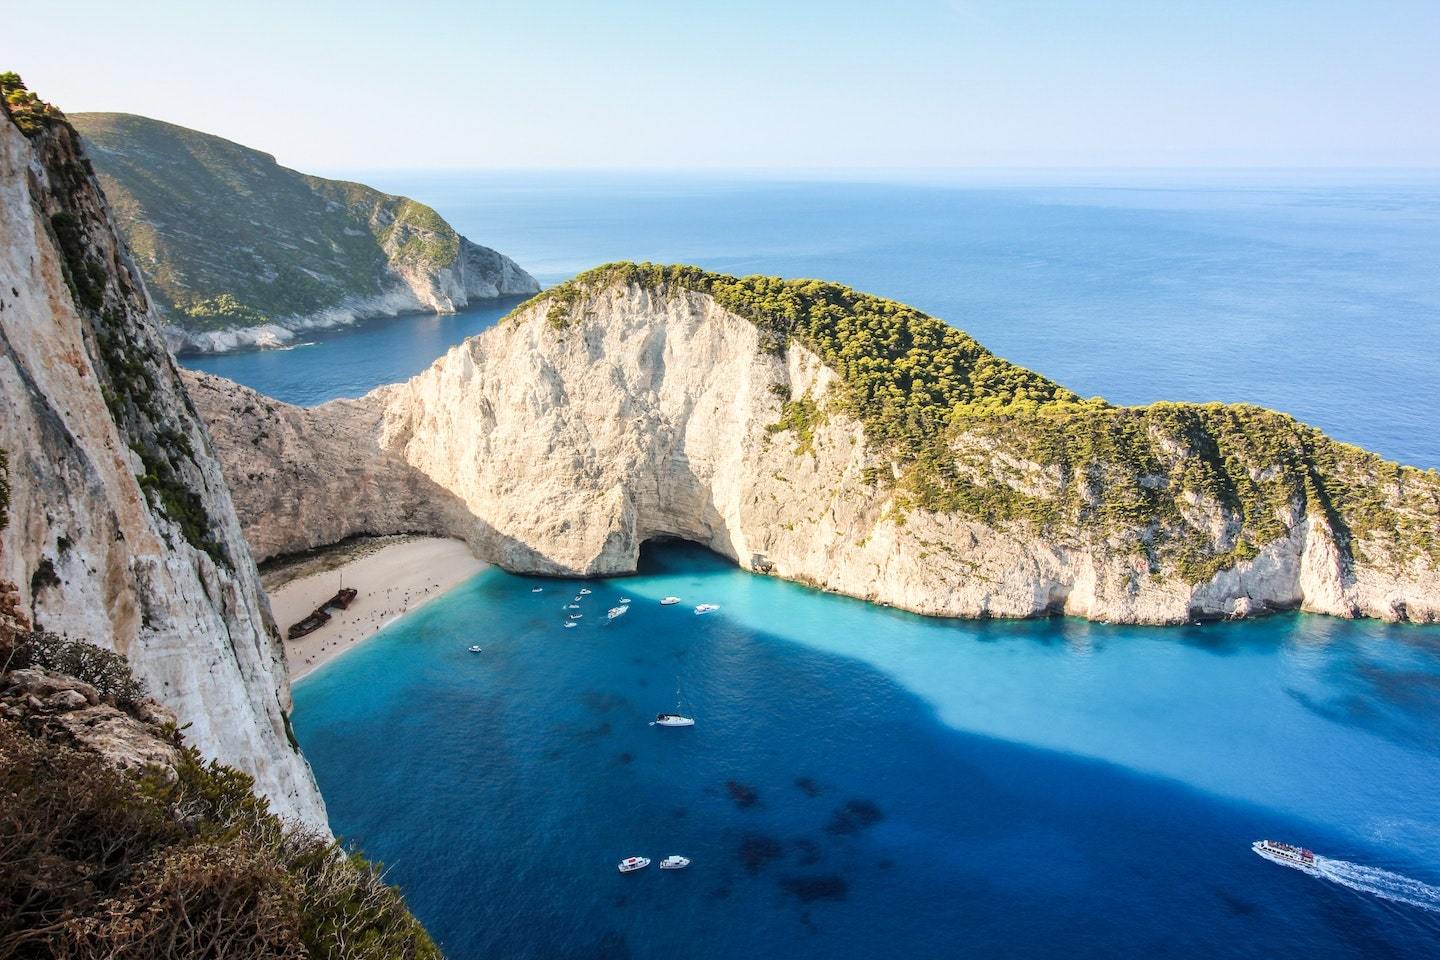 View of Shipwreck Cove in Zakynthos, Greece - a small beach surrounded by curved, rocky cliffs.